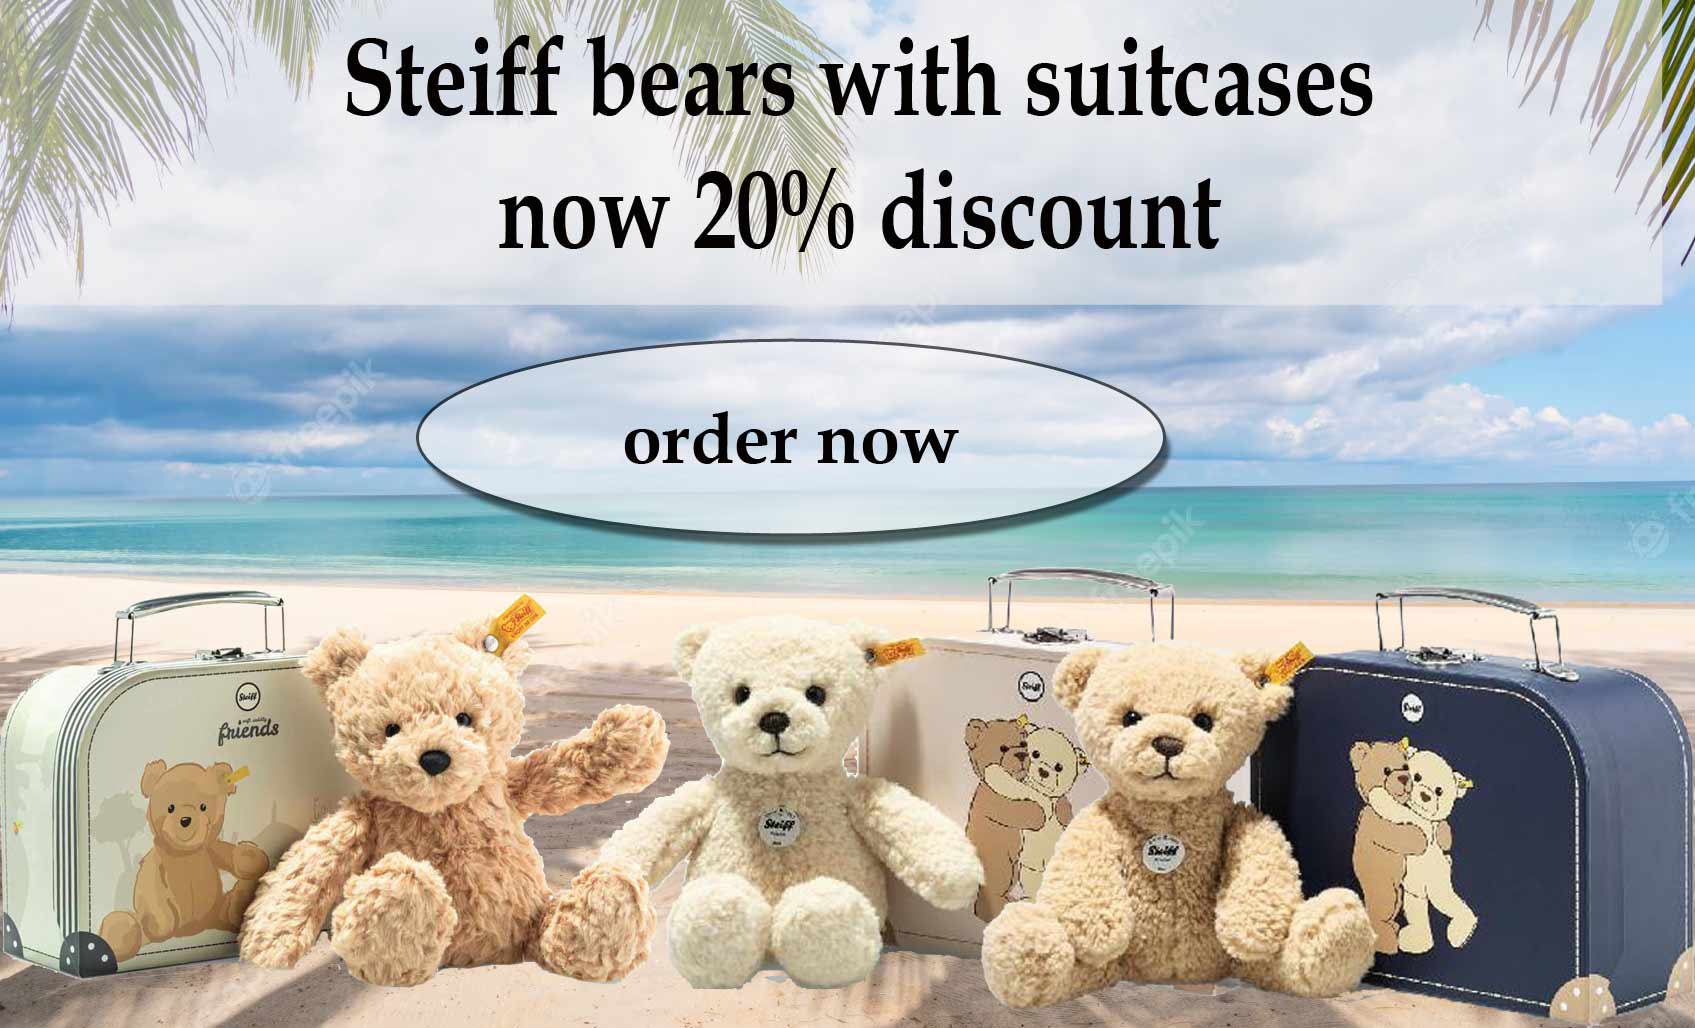 Steiff bears with suitcases